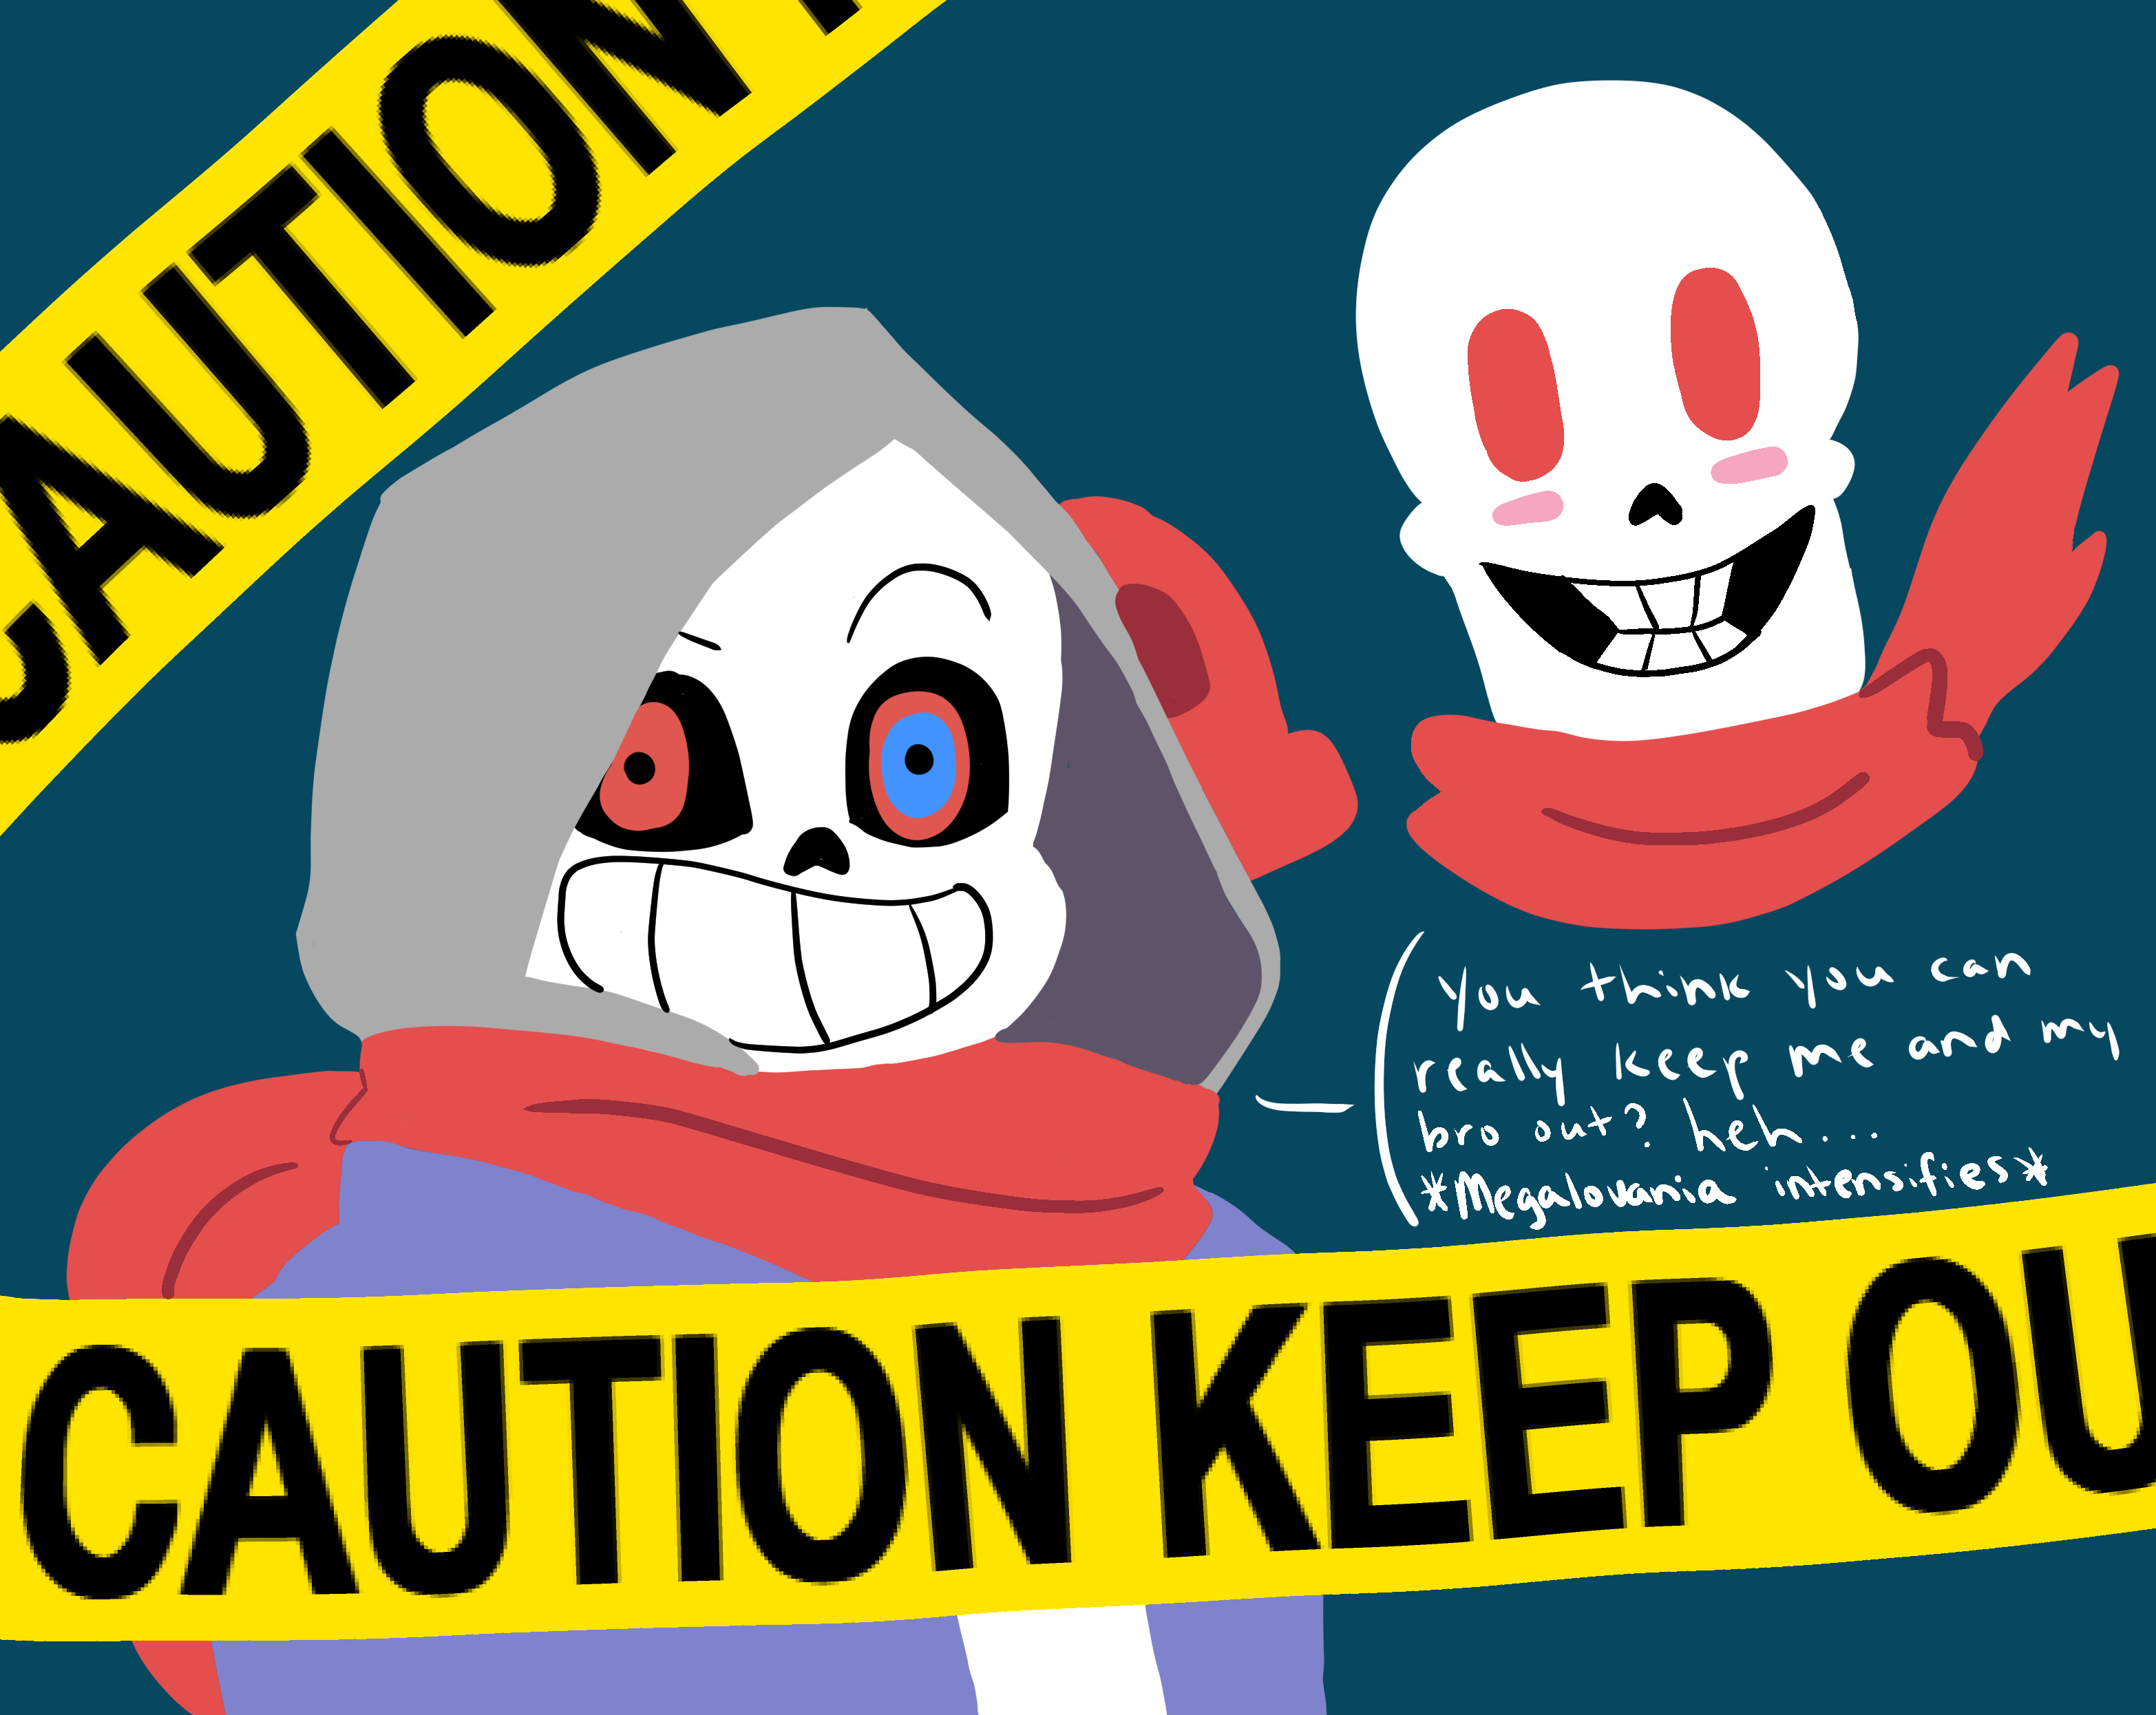 What could Dust!Sans think of you? - Quiz